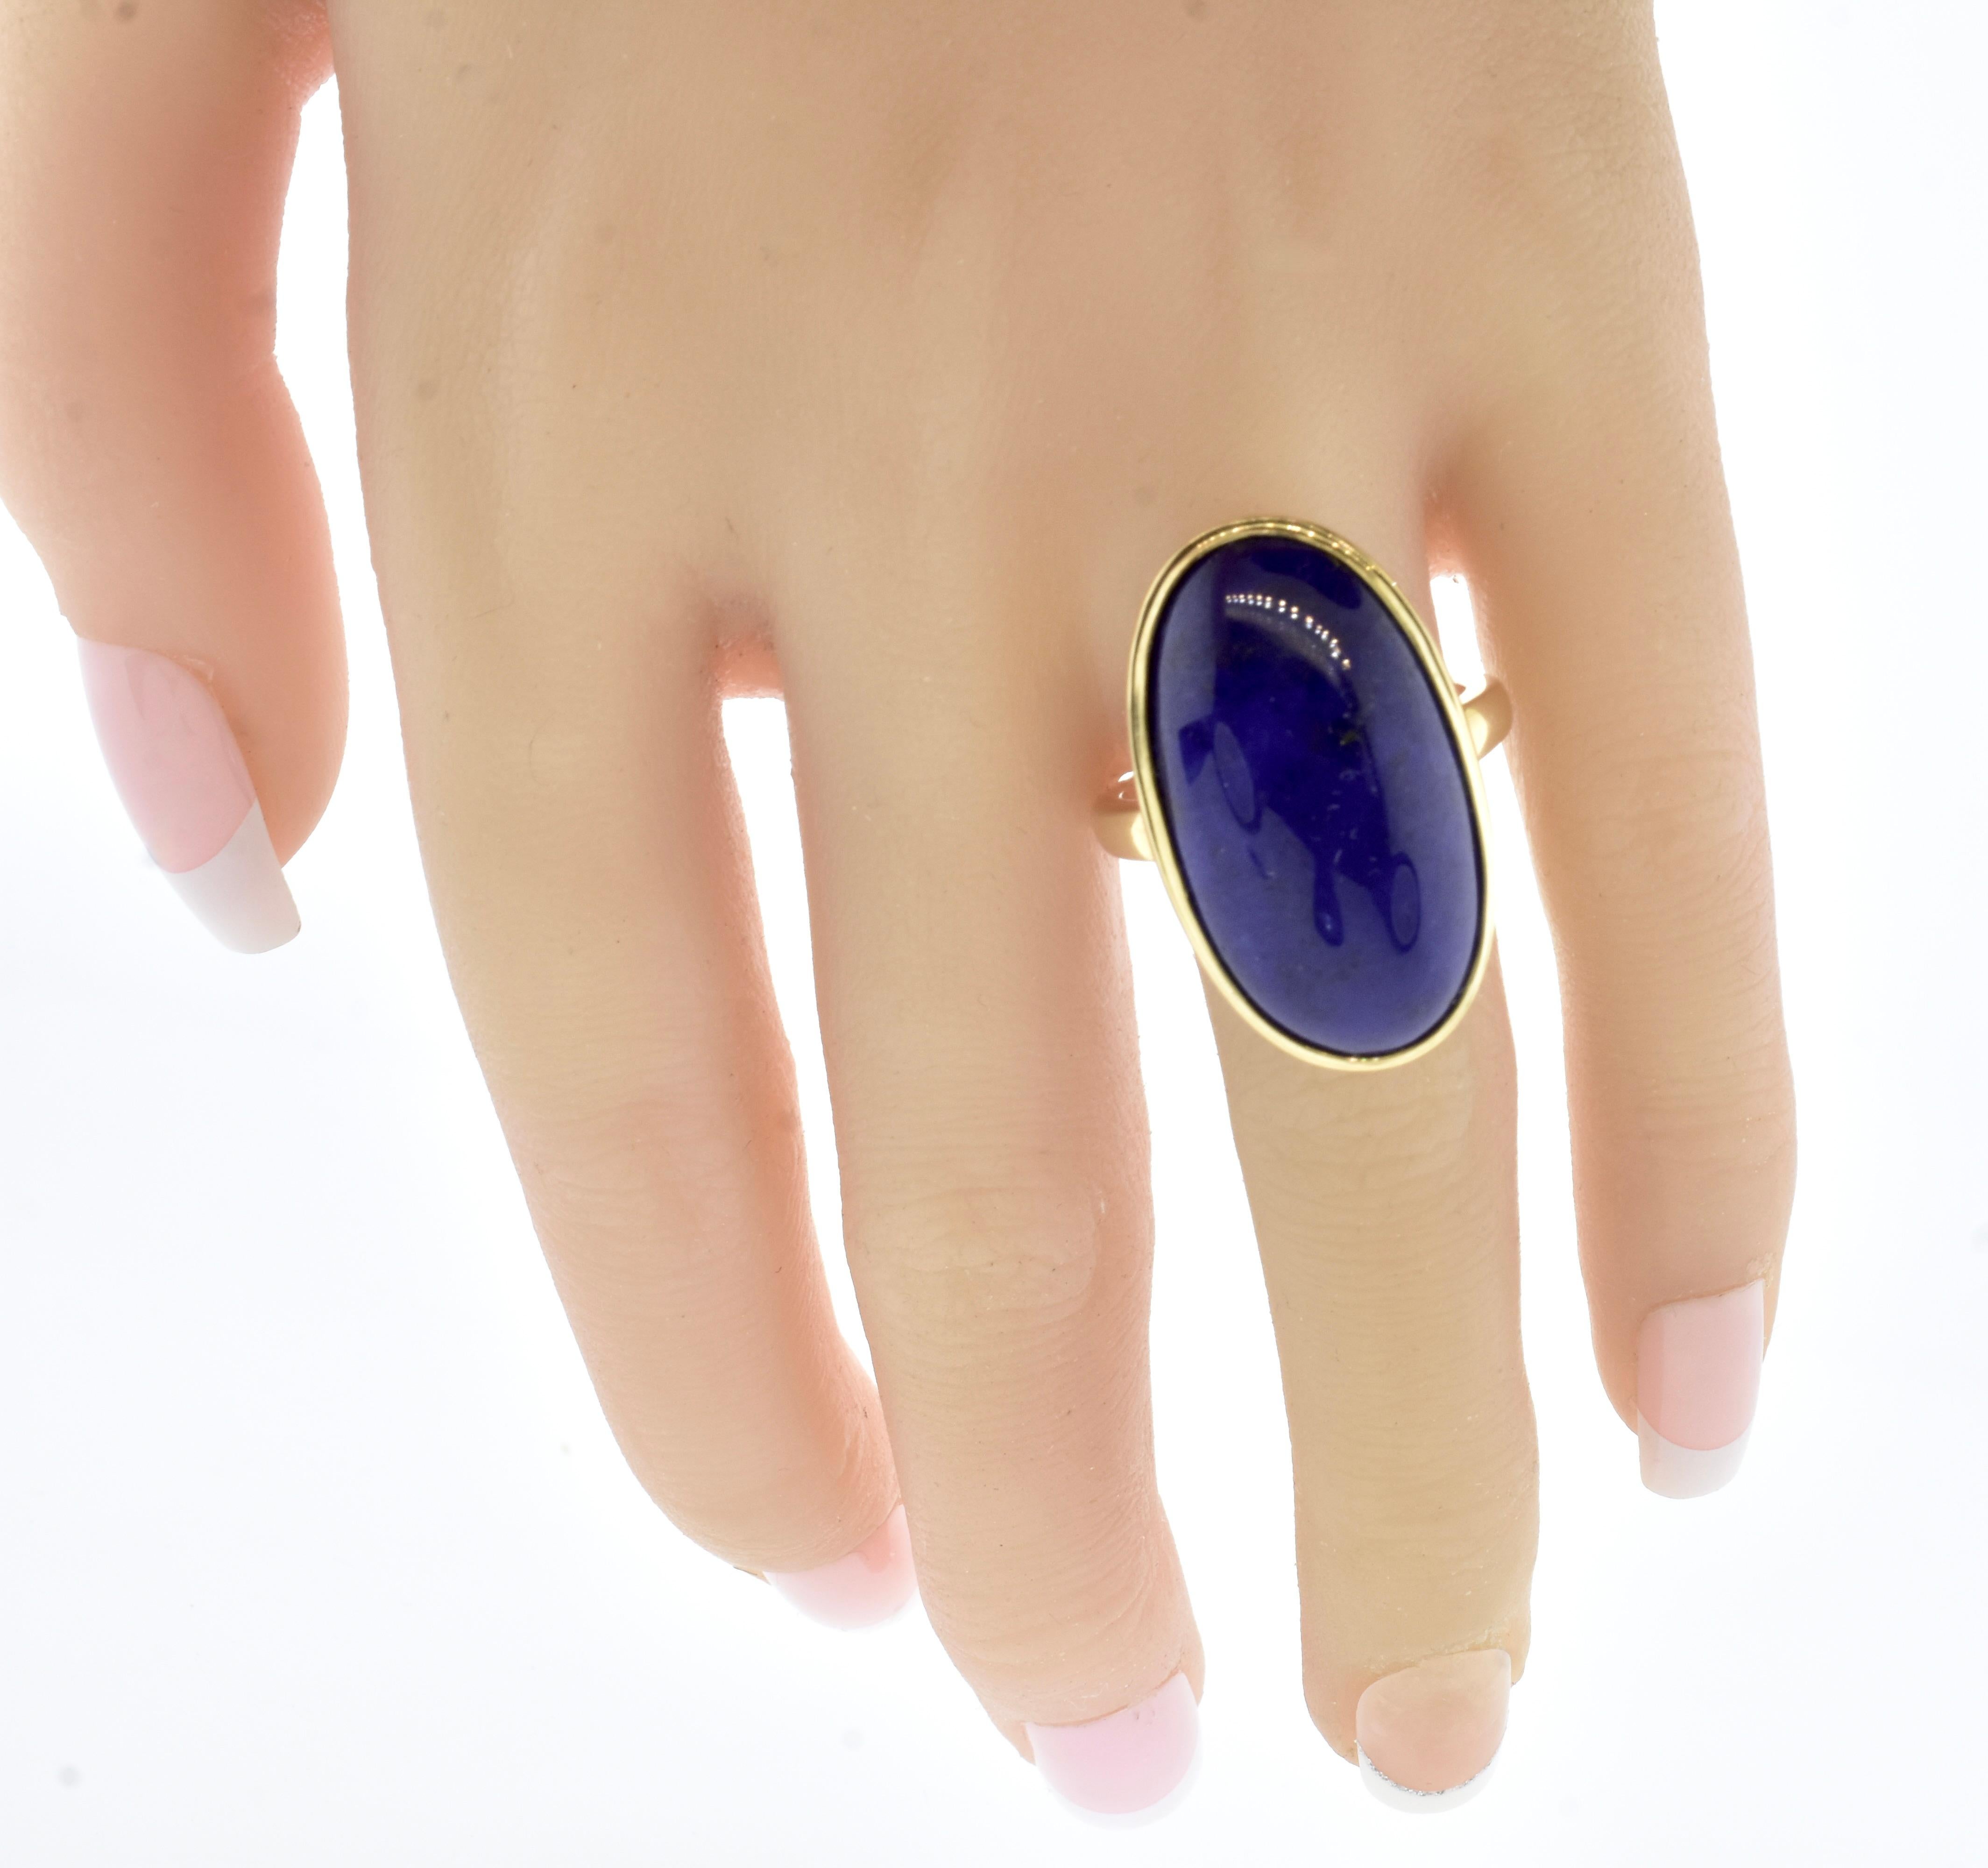 Fine Vivid Blue Lapis Lazuli and yellow gold ring.  This fine lapis is estimated to weigh 25.5 cts. It is a deep vivid blue with tiny gold flecks - endemic to fine lapis lazuli.  

The long oval is a very complimentary shape to the finger, this ring